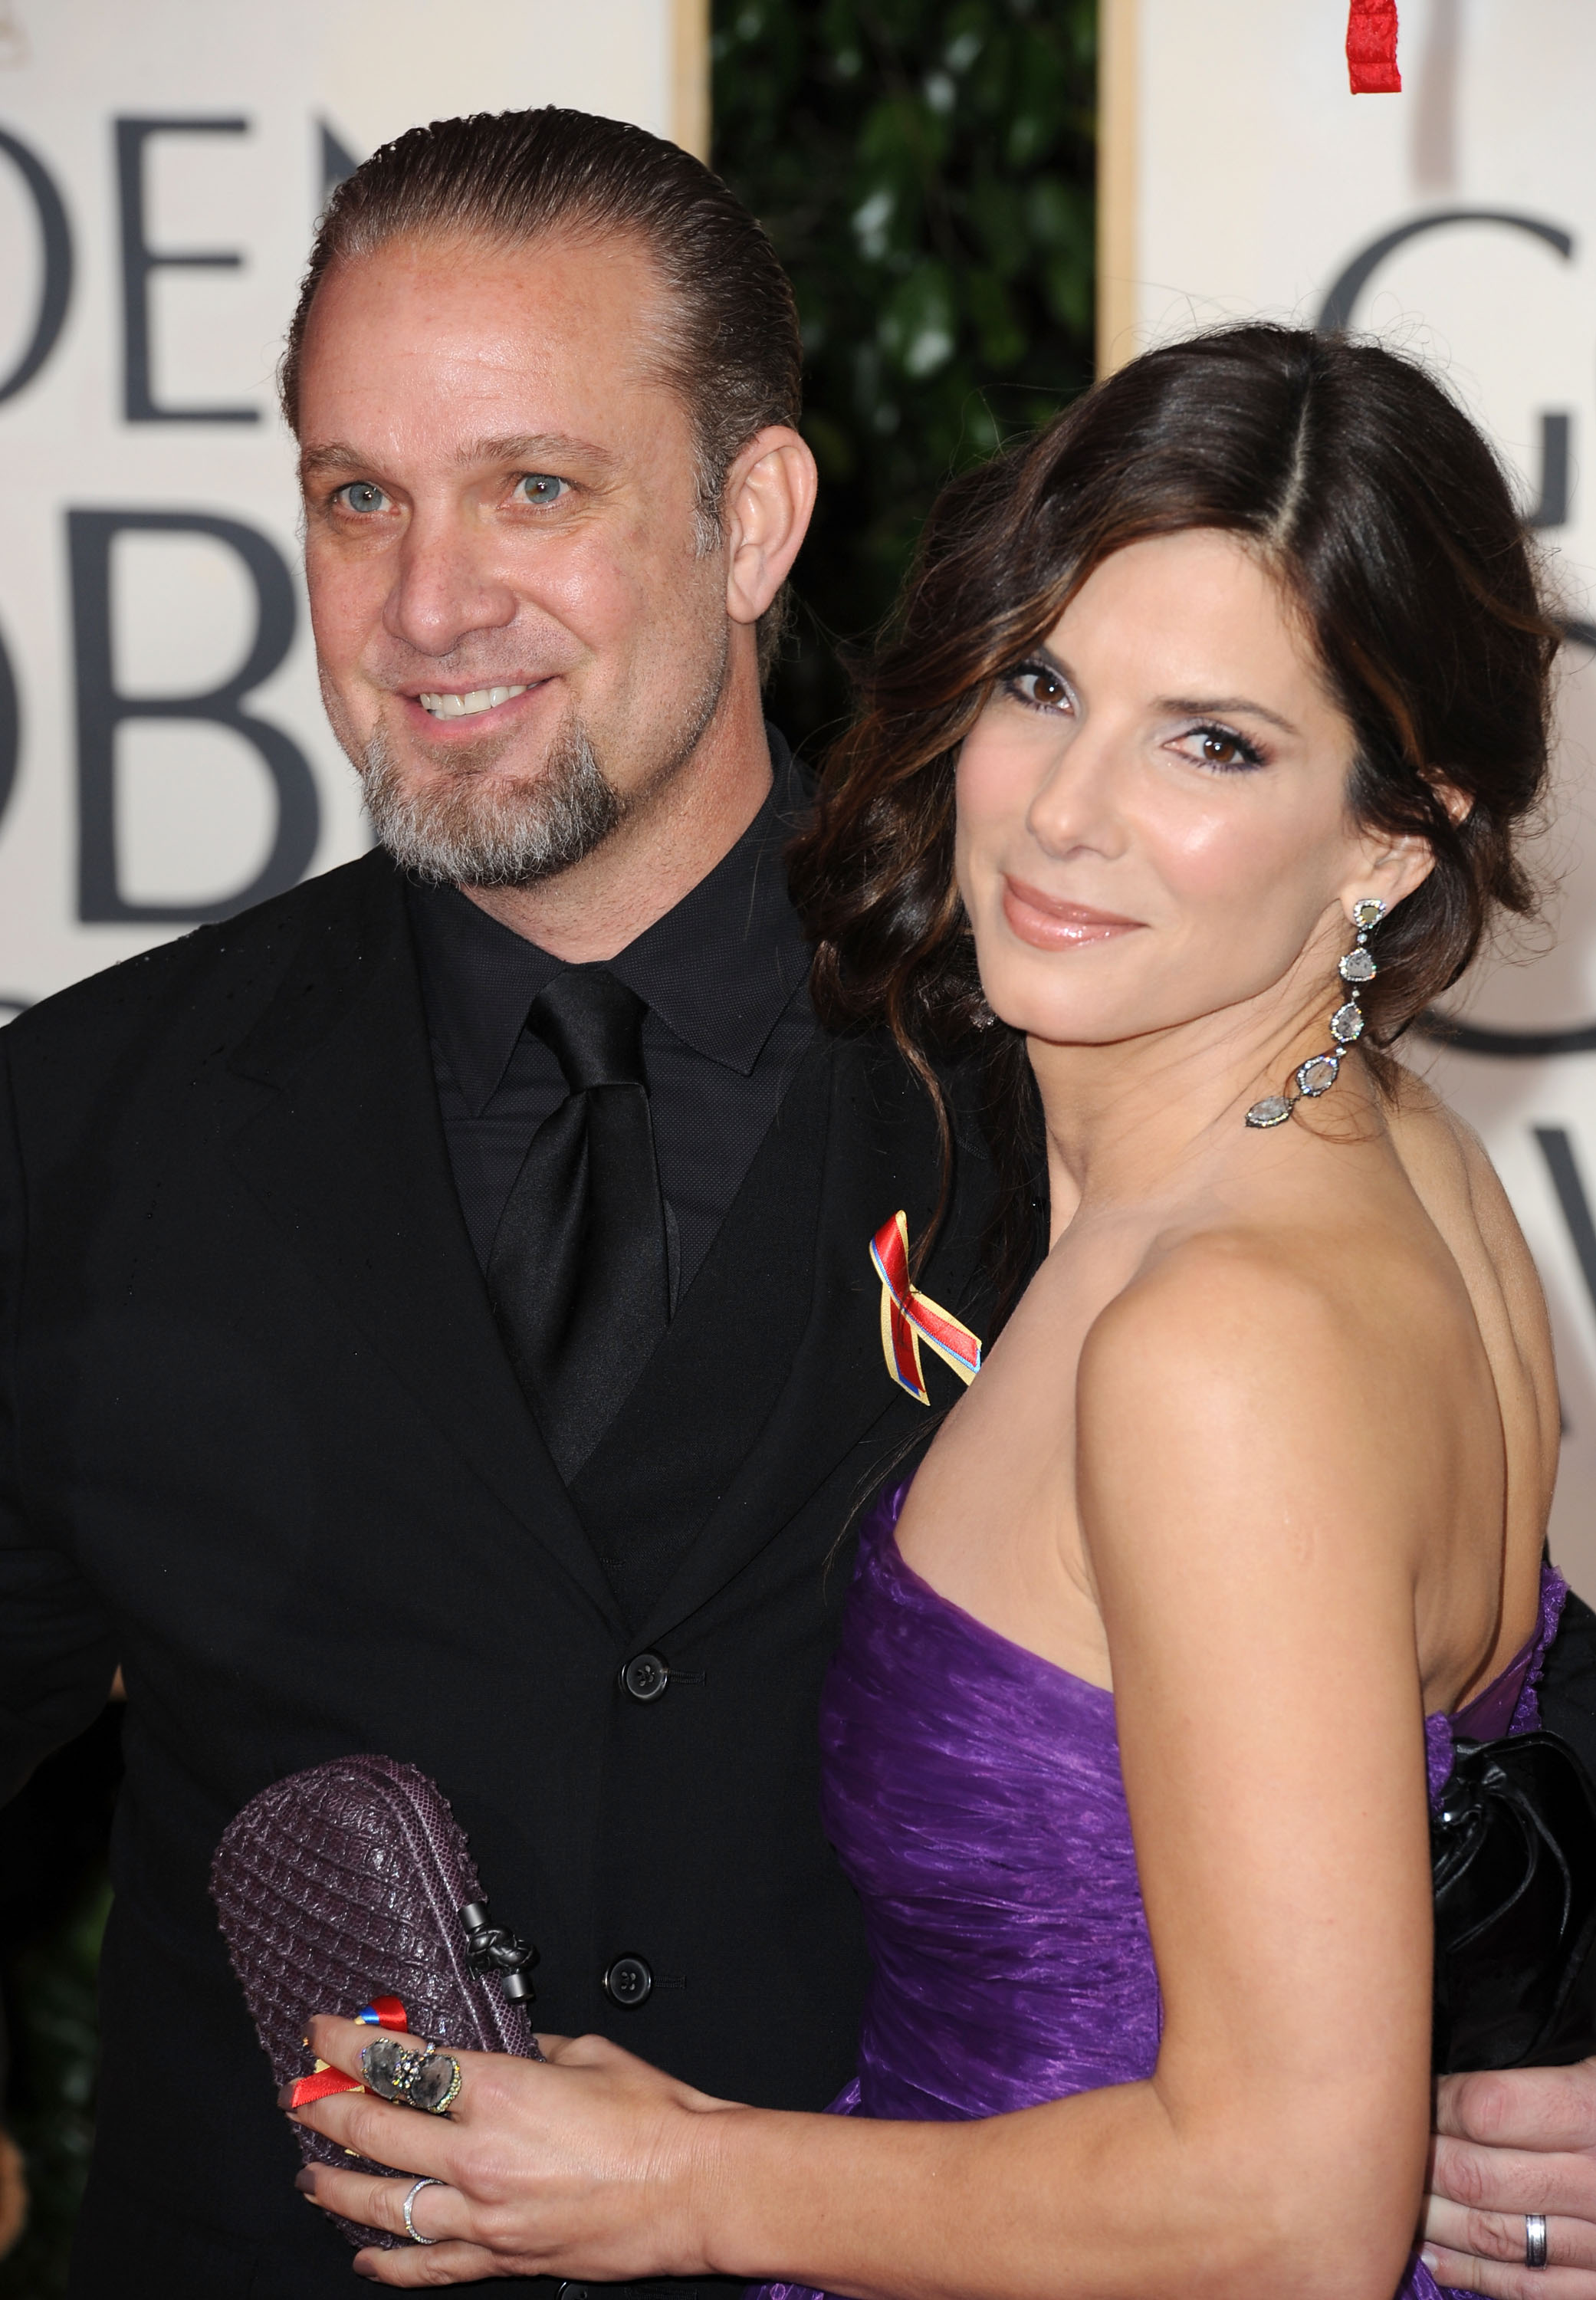 Sandra Bullock and Jesse James attend the 67th Golden Globe Awards on January 17, 2010 in Beverly Hills, California | Source: Getty Images